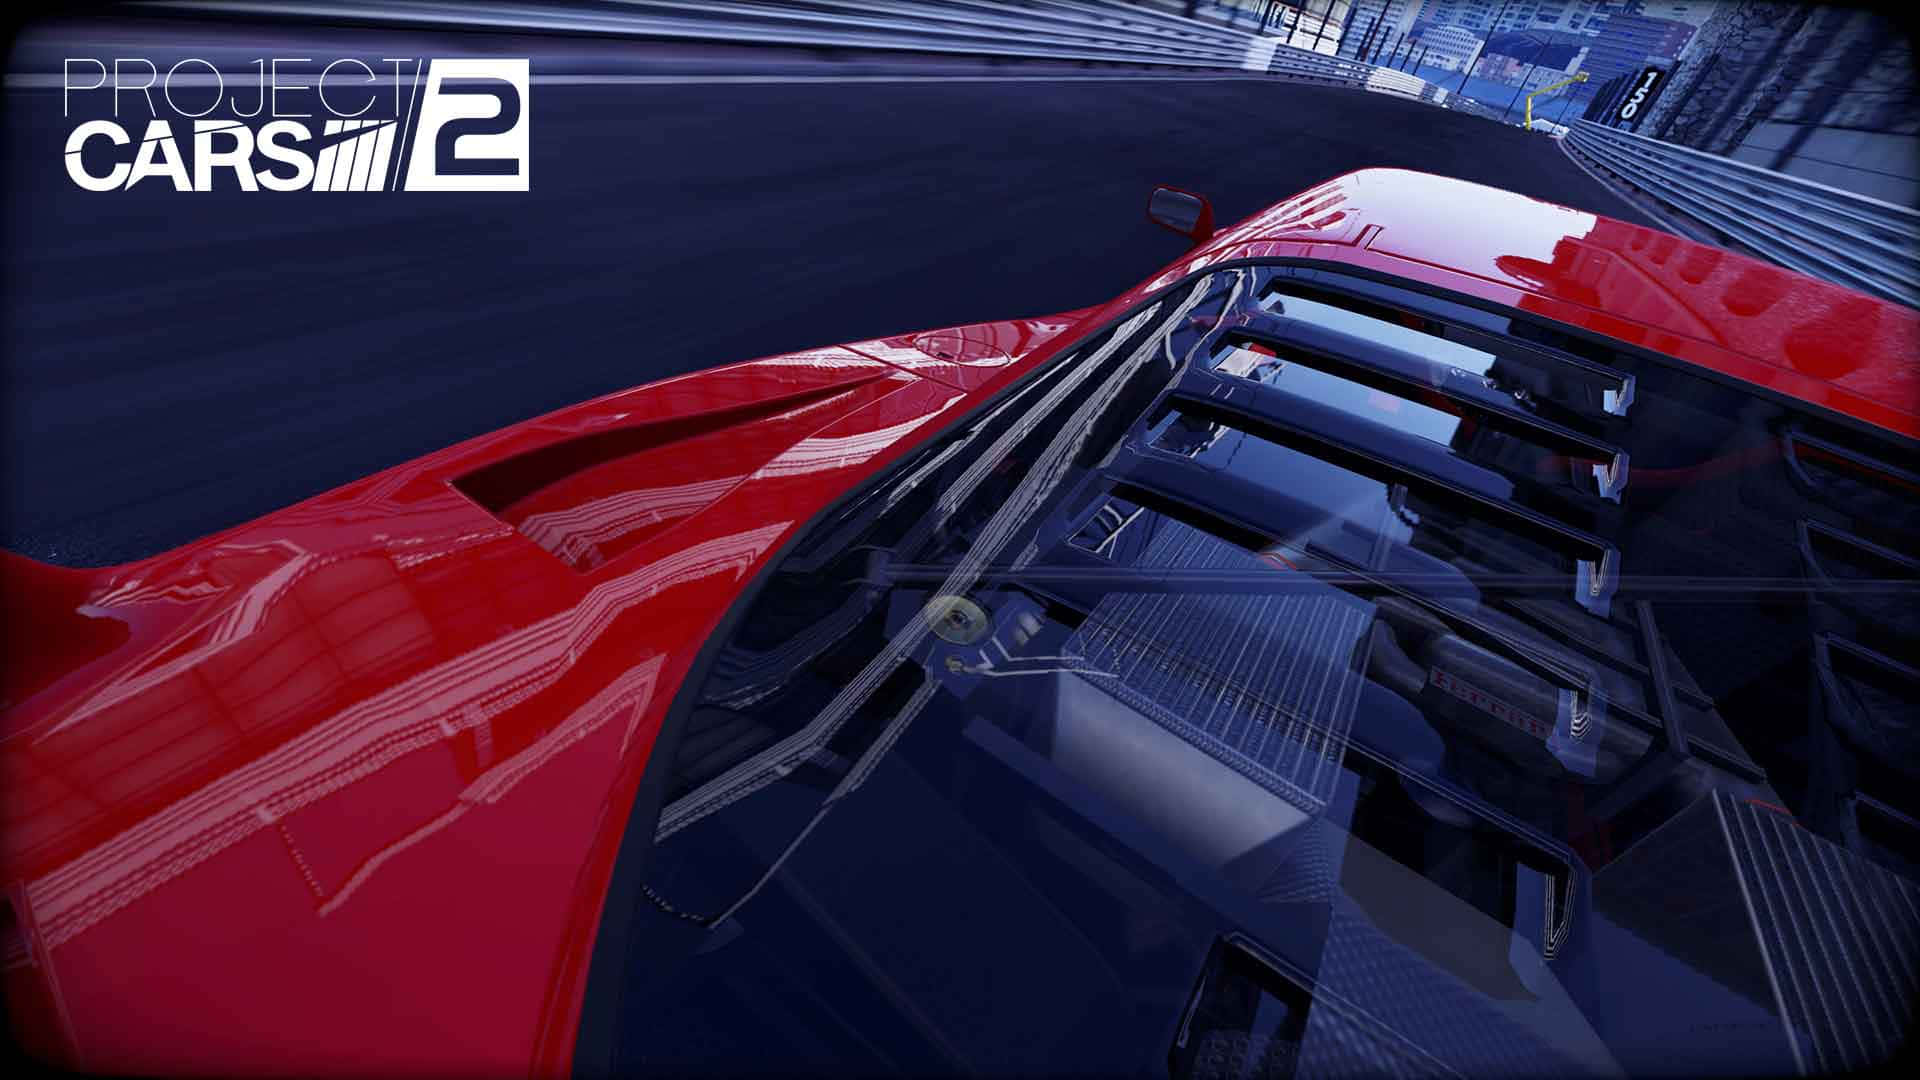 Get Ready to Race with HD Project Cars 2